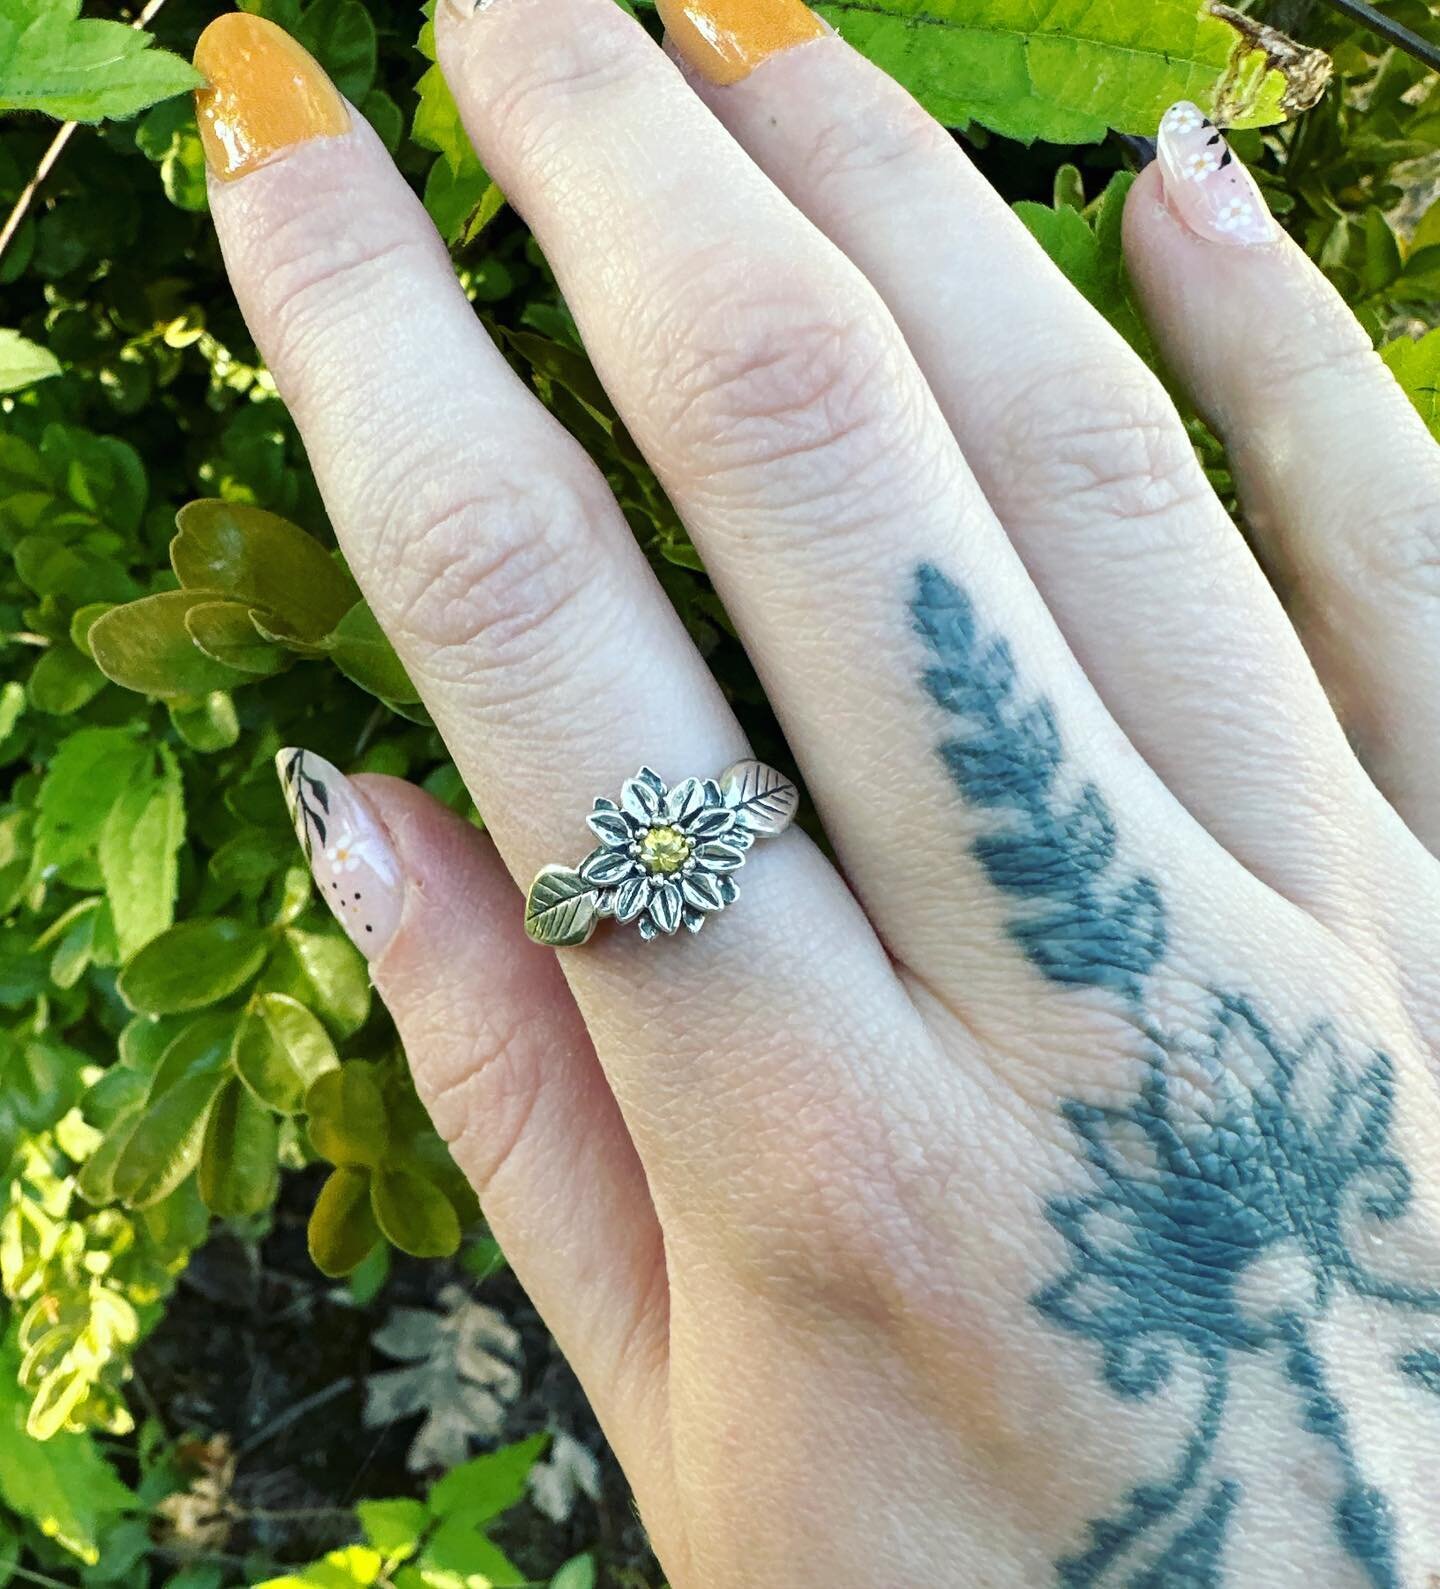 Completed this custom sunflower ring with yellow sapphire this week! My first time doing a &ldquo;bead&rdquo; setting and I love how it turned out! What do you think? Should I add this design to the shop?